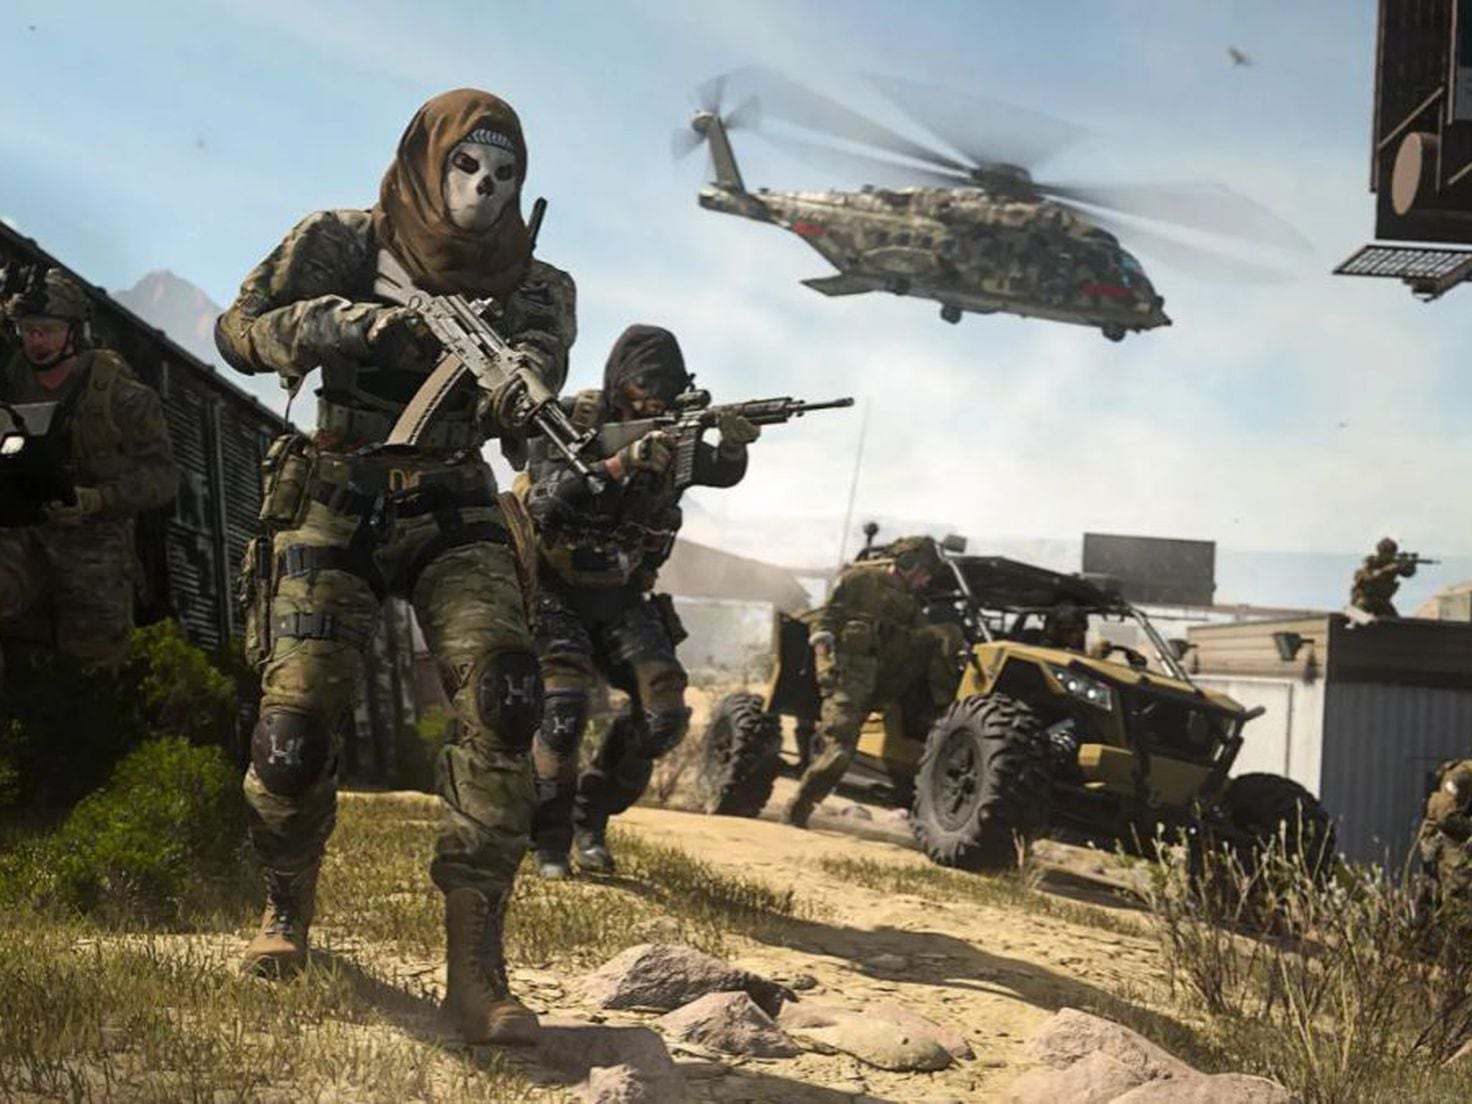 Call of Duty: Modern Warfare 2 release date set for October 28